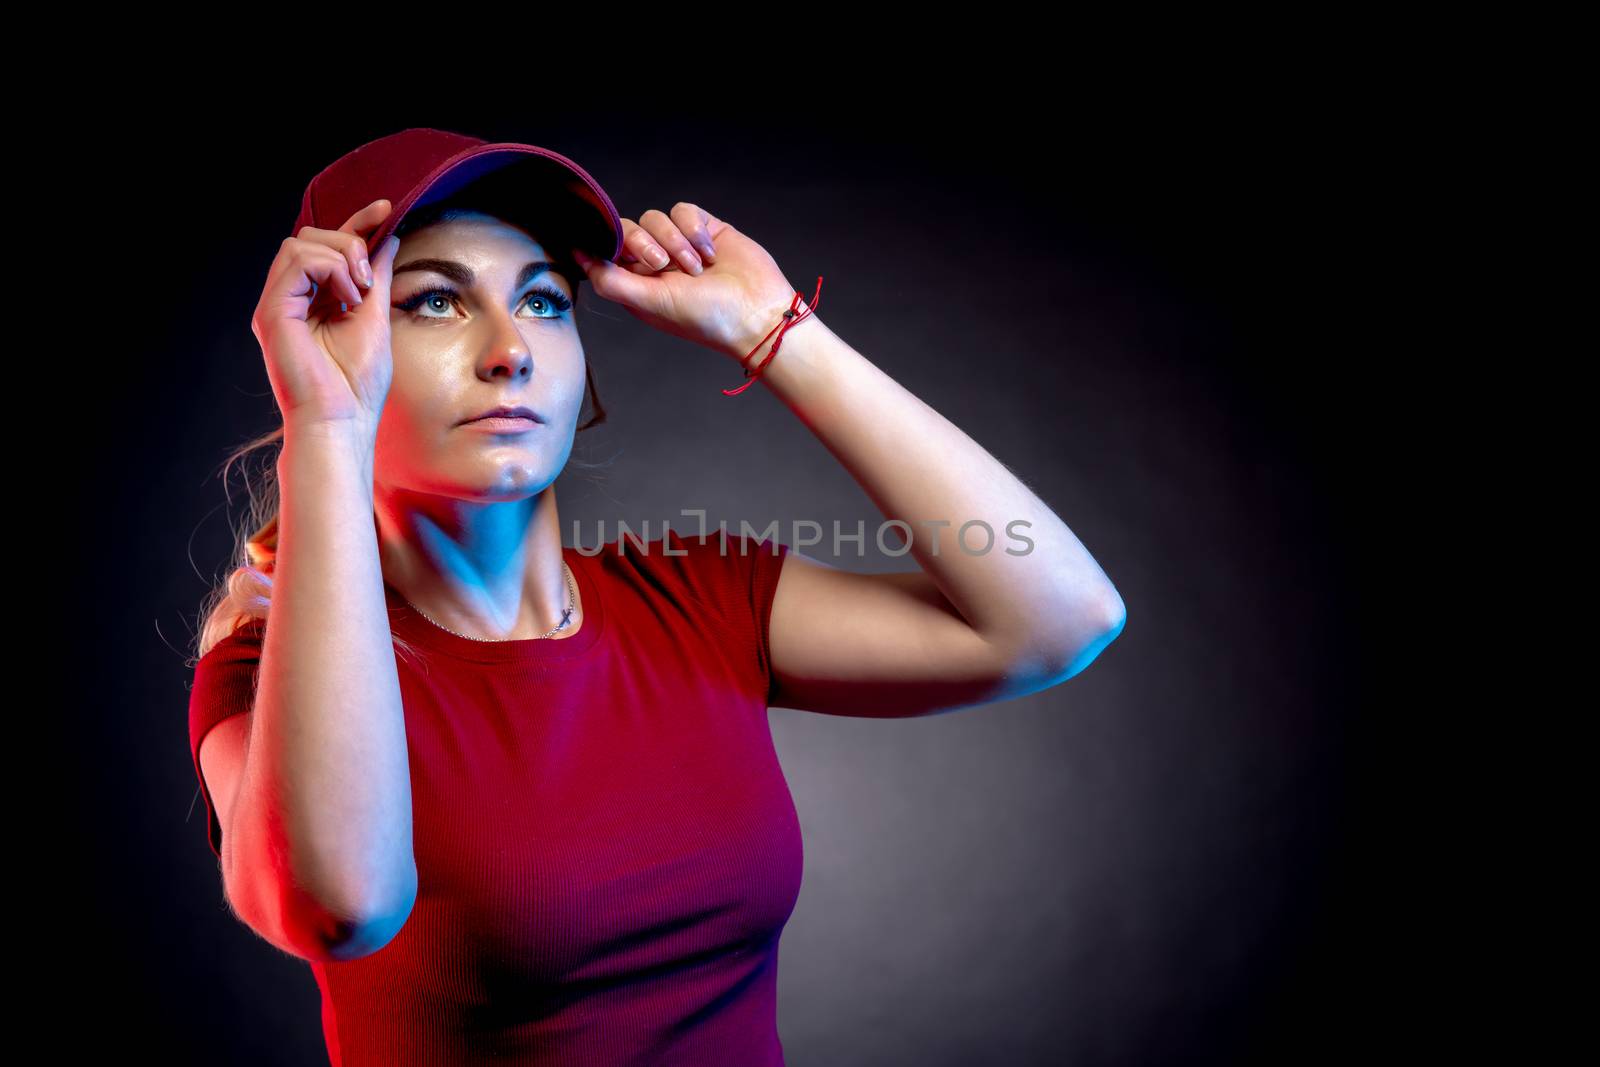 Portrait of a woman in a baseball cap on a black background